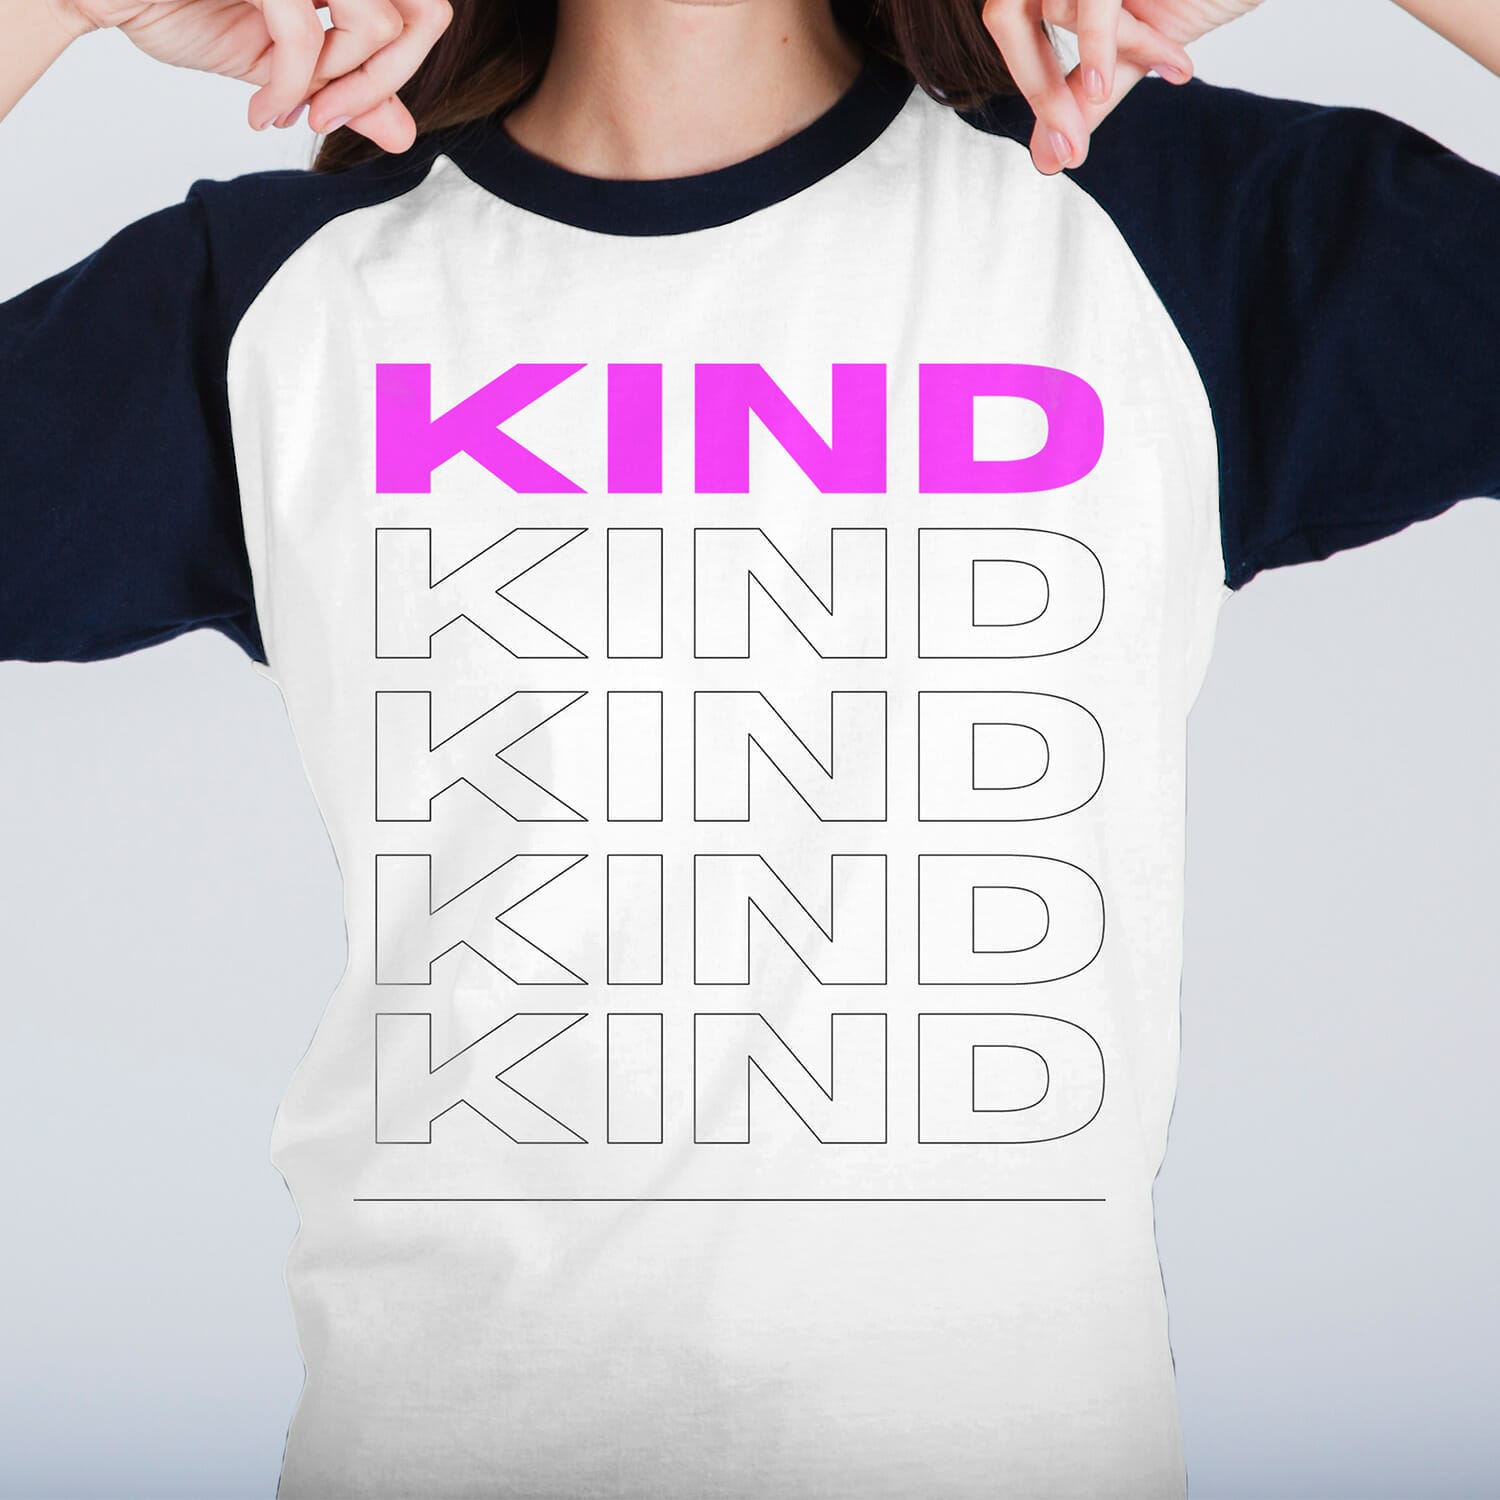 Kind Typography Tshirt Design For Free